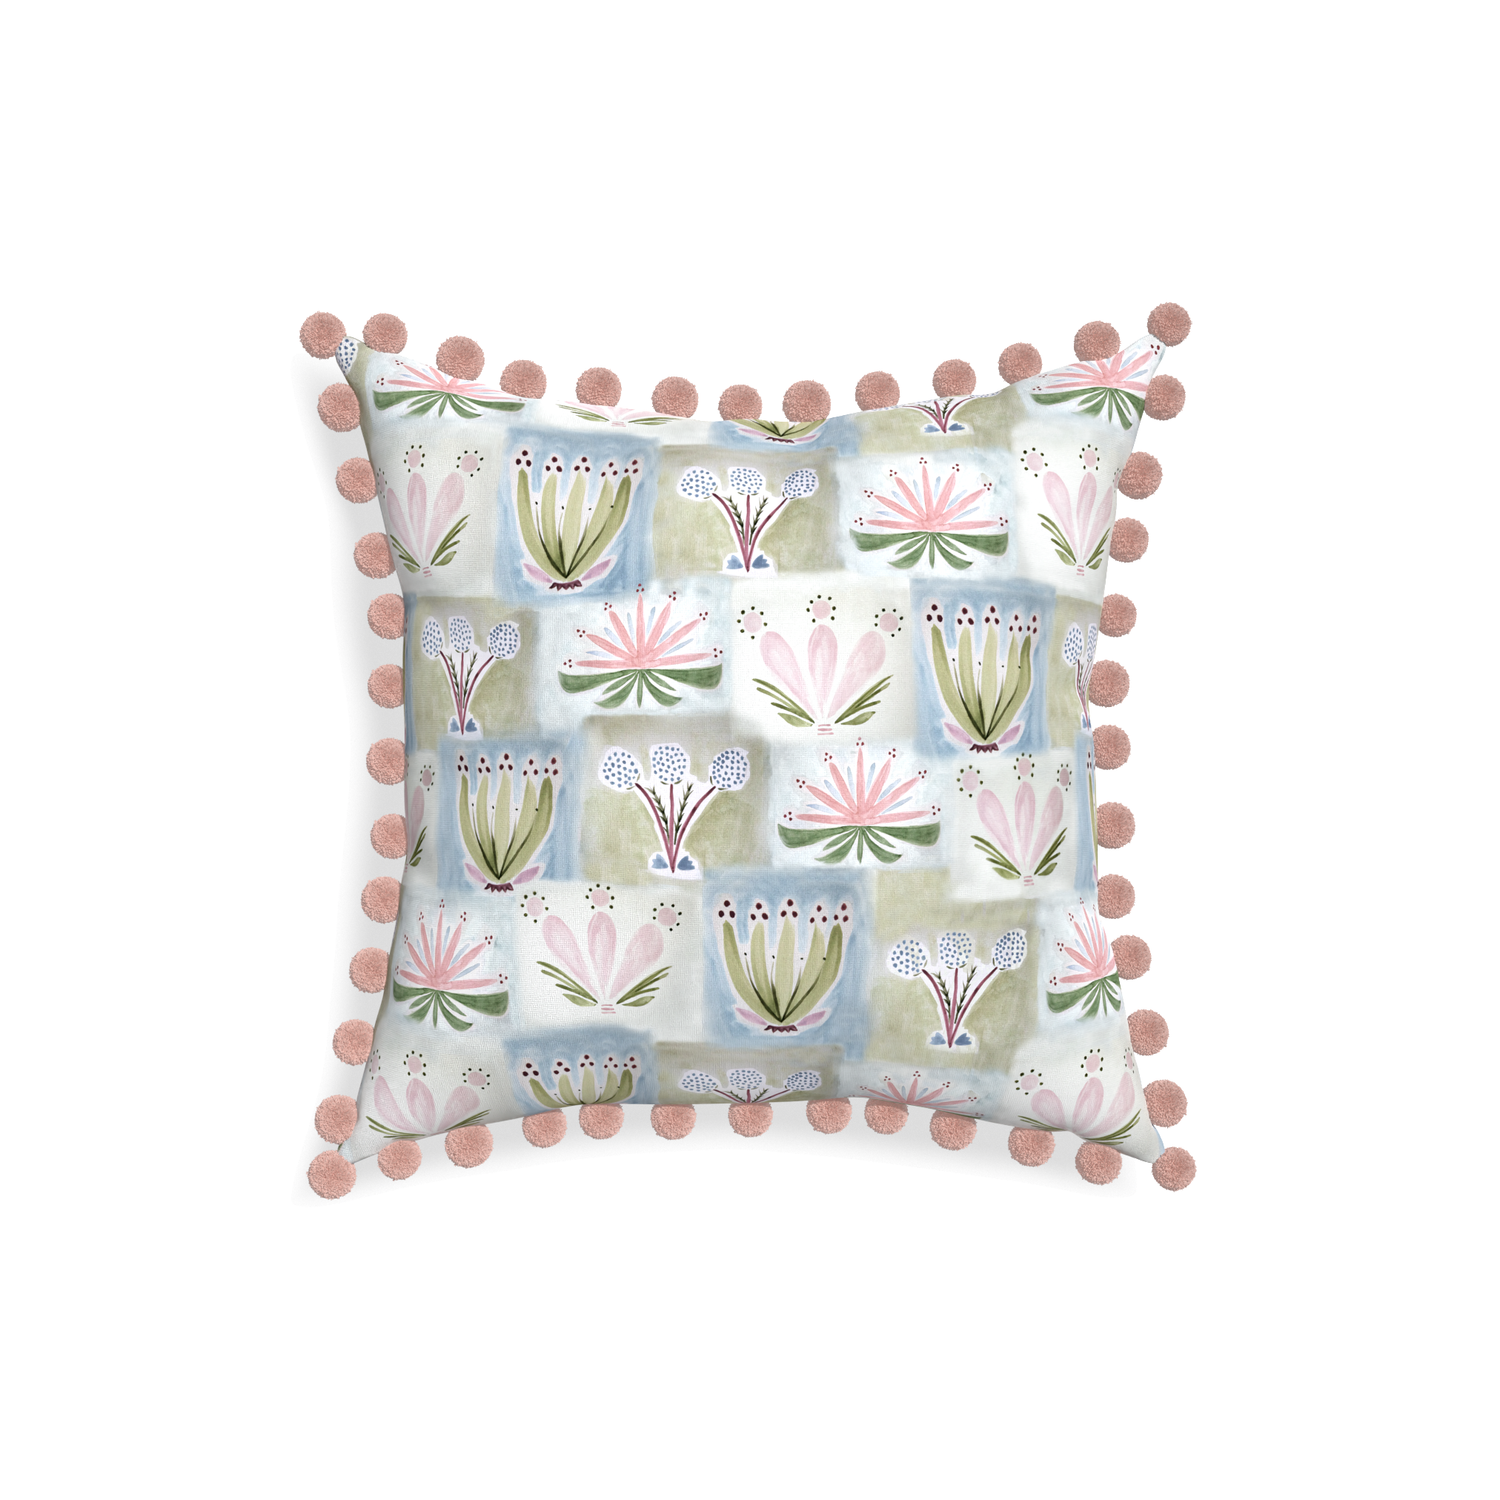 18-square harper custom hand-painted floralpillow with rose pom pom on white background